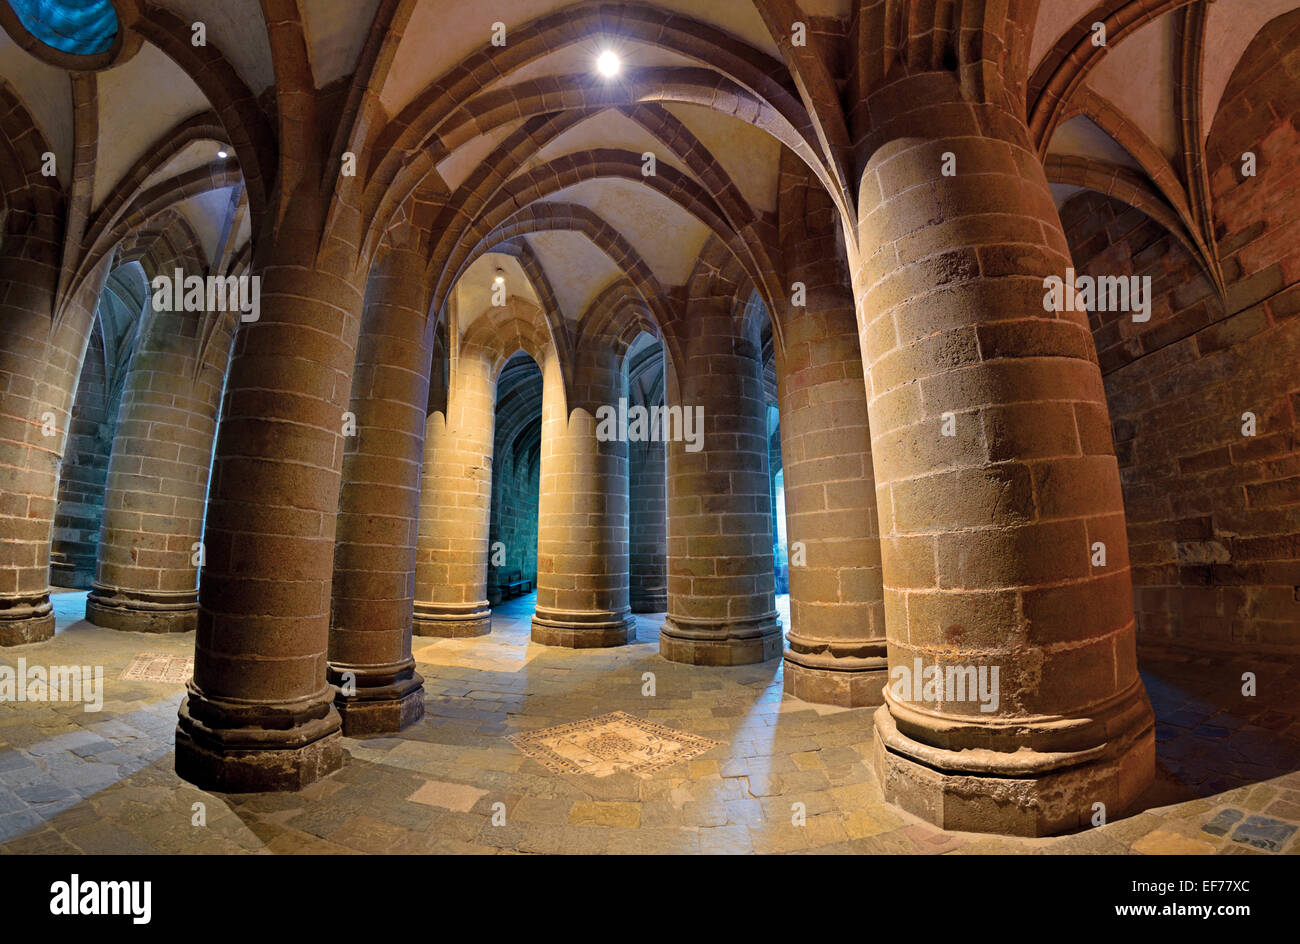 France, Normandy: Detailed  view of the  Great Pillar Crypt of the Abbey St. Pierre in Le Mont St. Michel Stock Photo